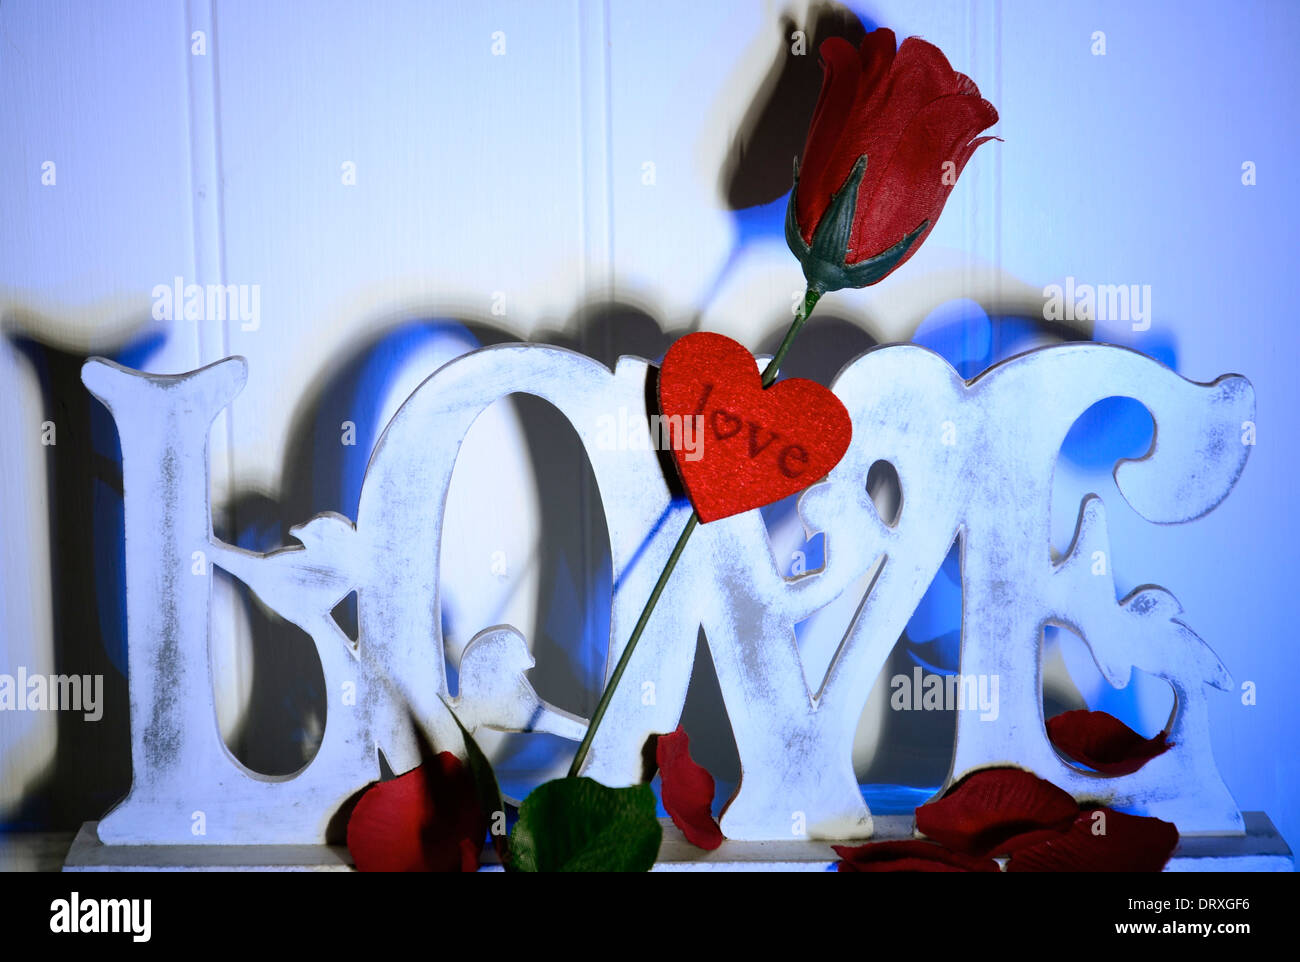 A Love scene for Valentines Day Stock Photo